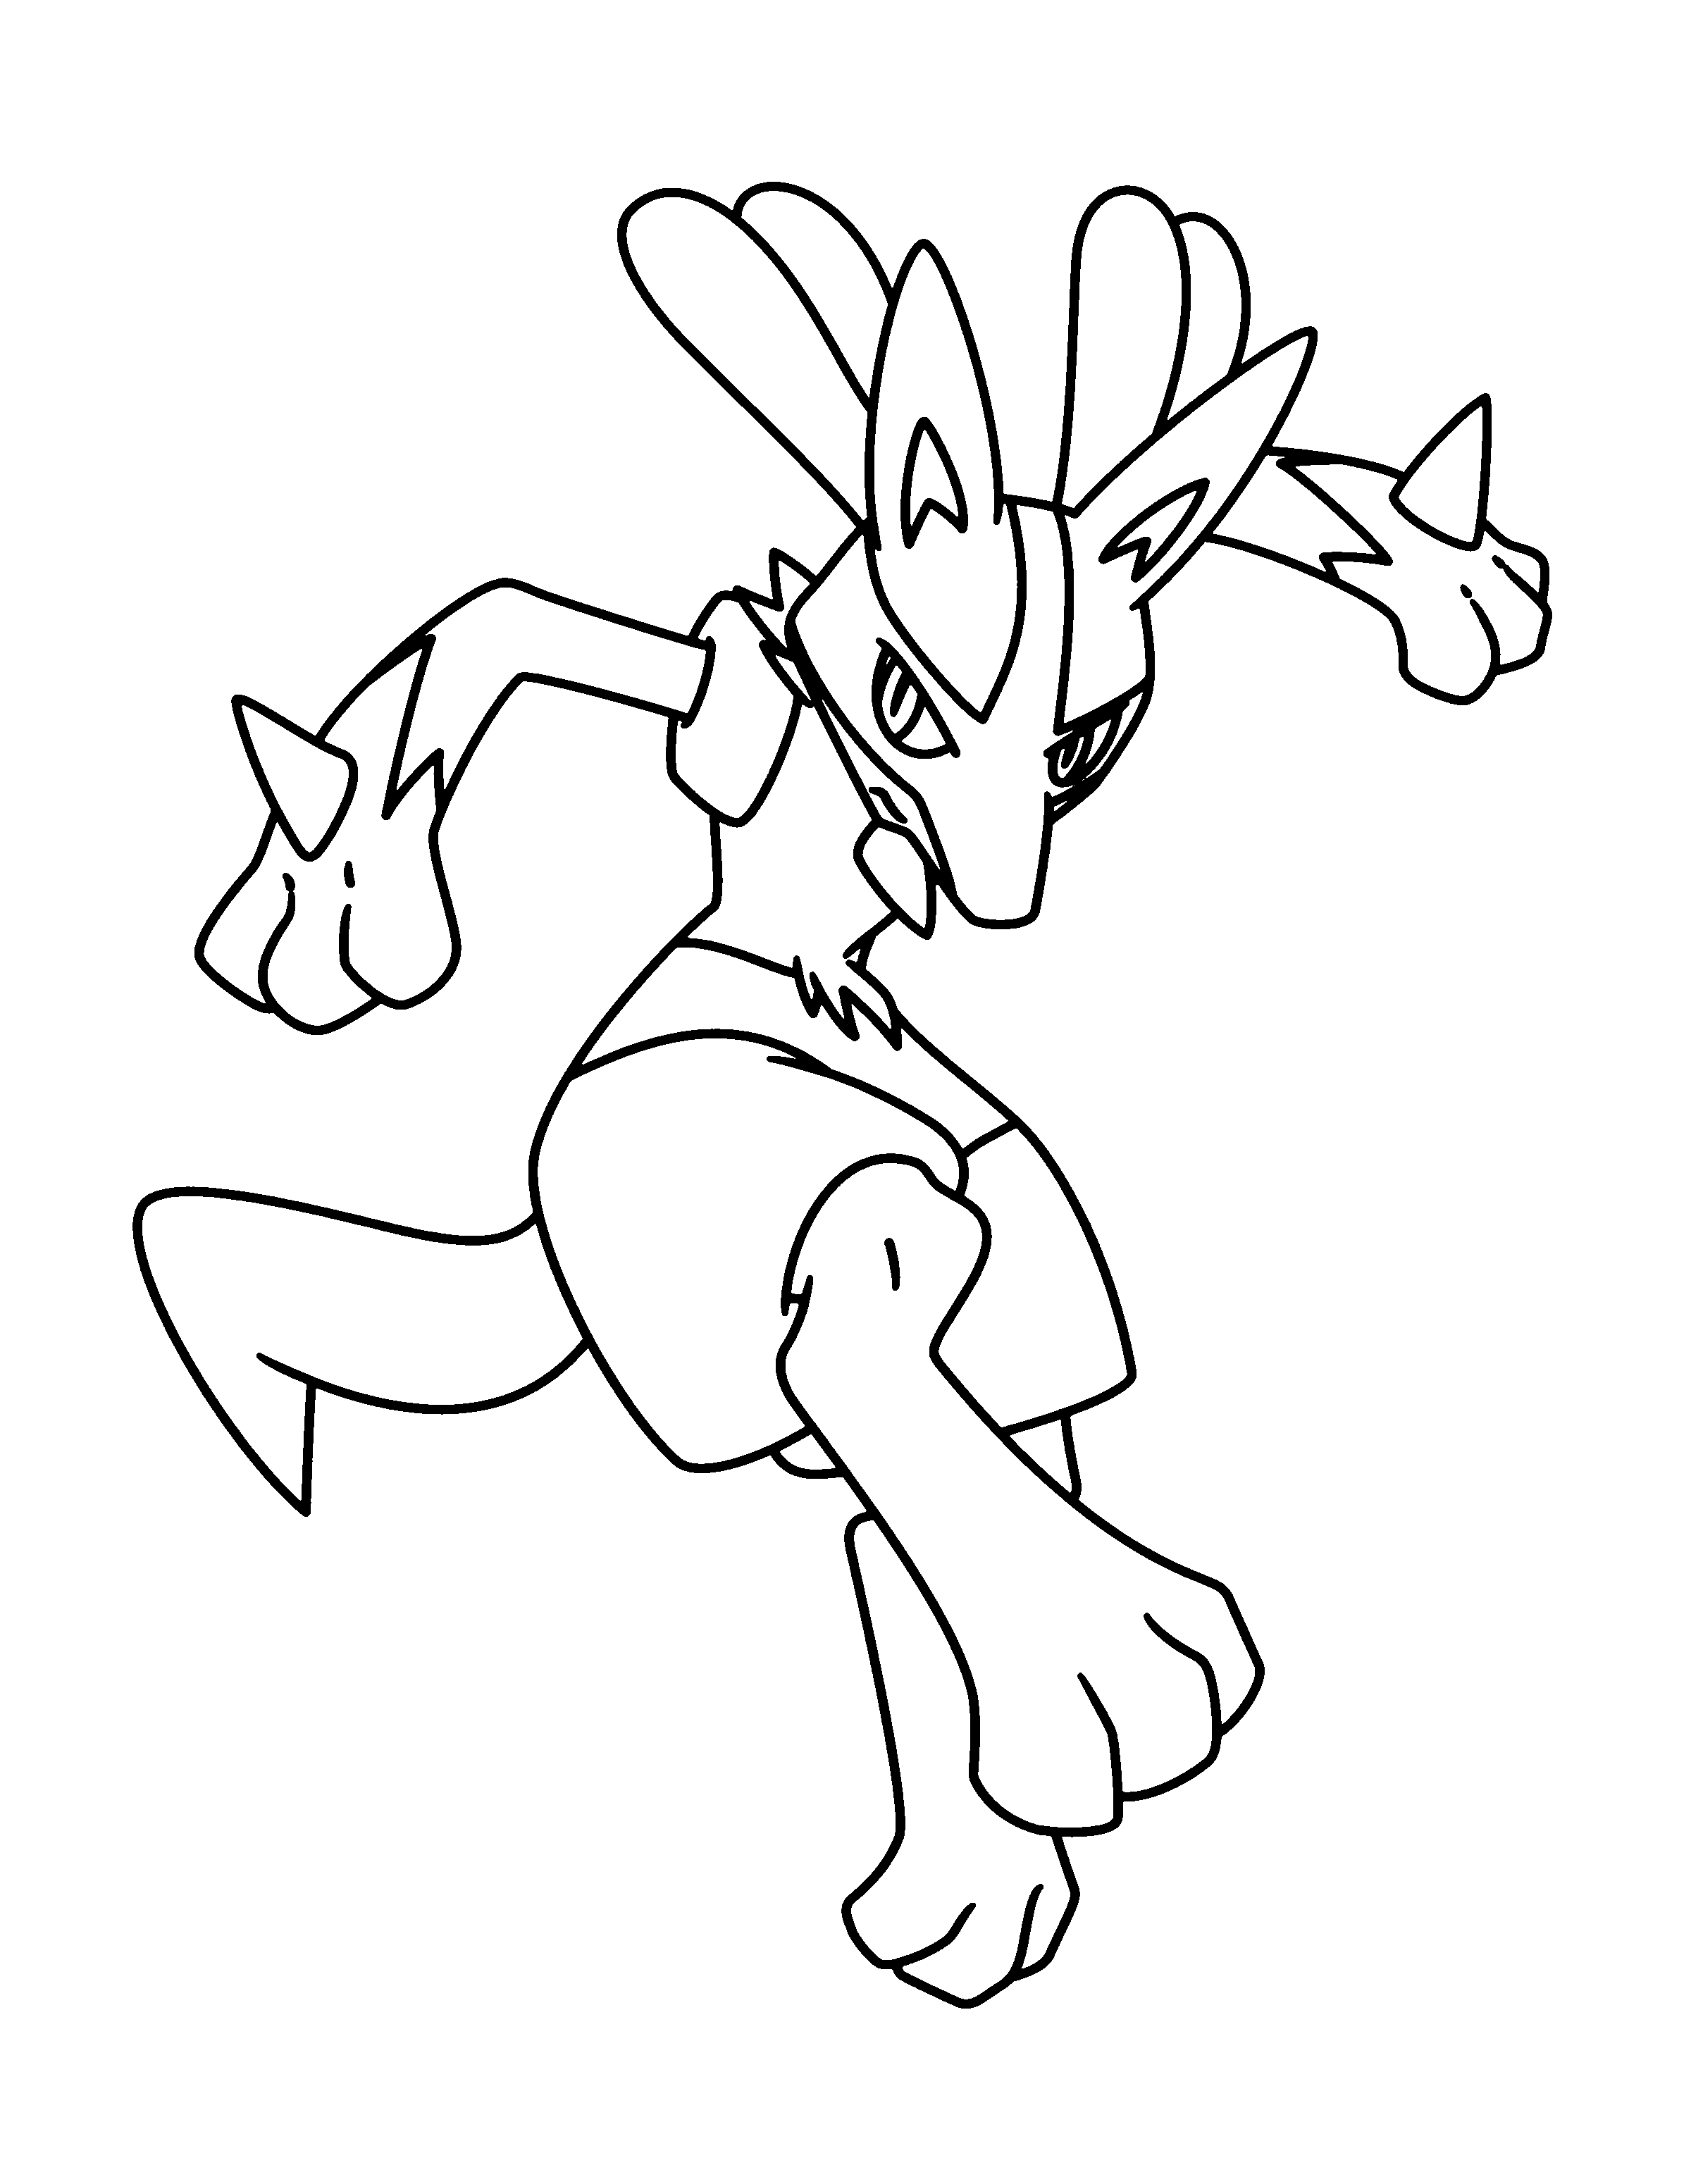 Pokemon Lucario Coloring Pages GregoryKathy